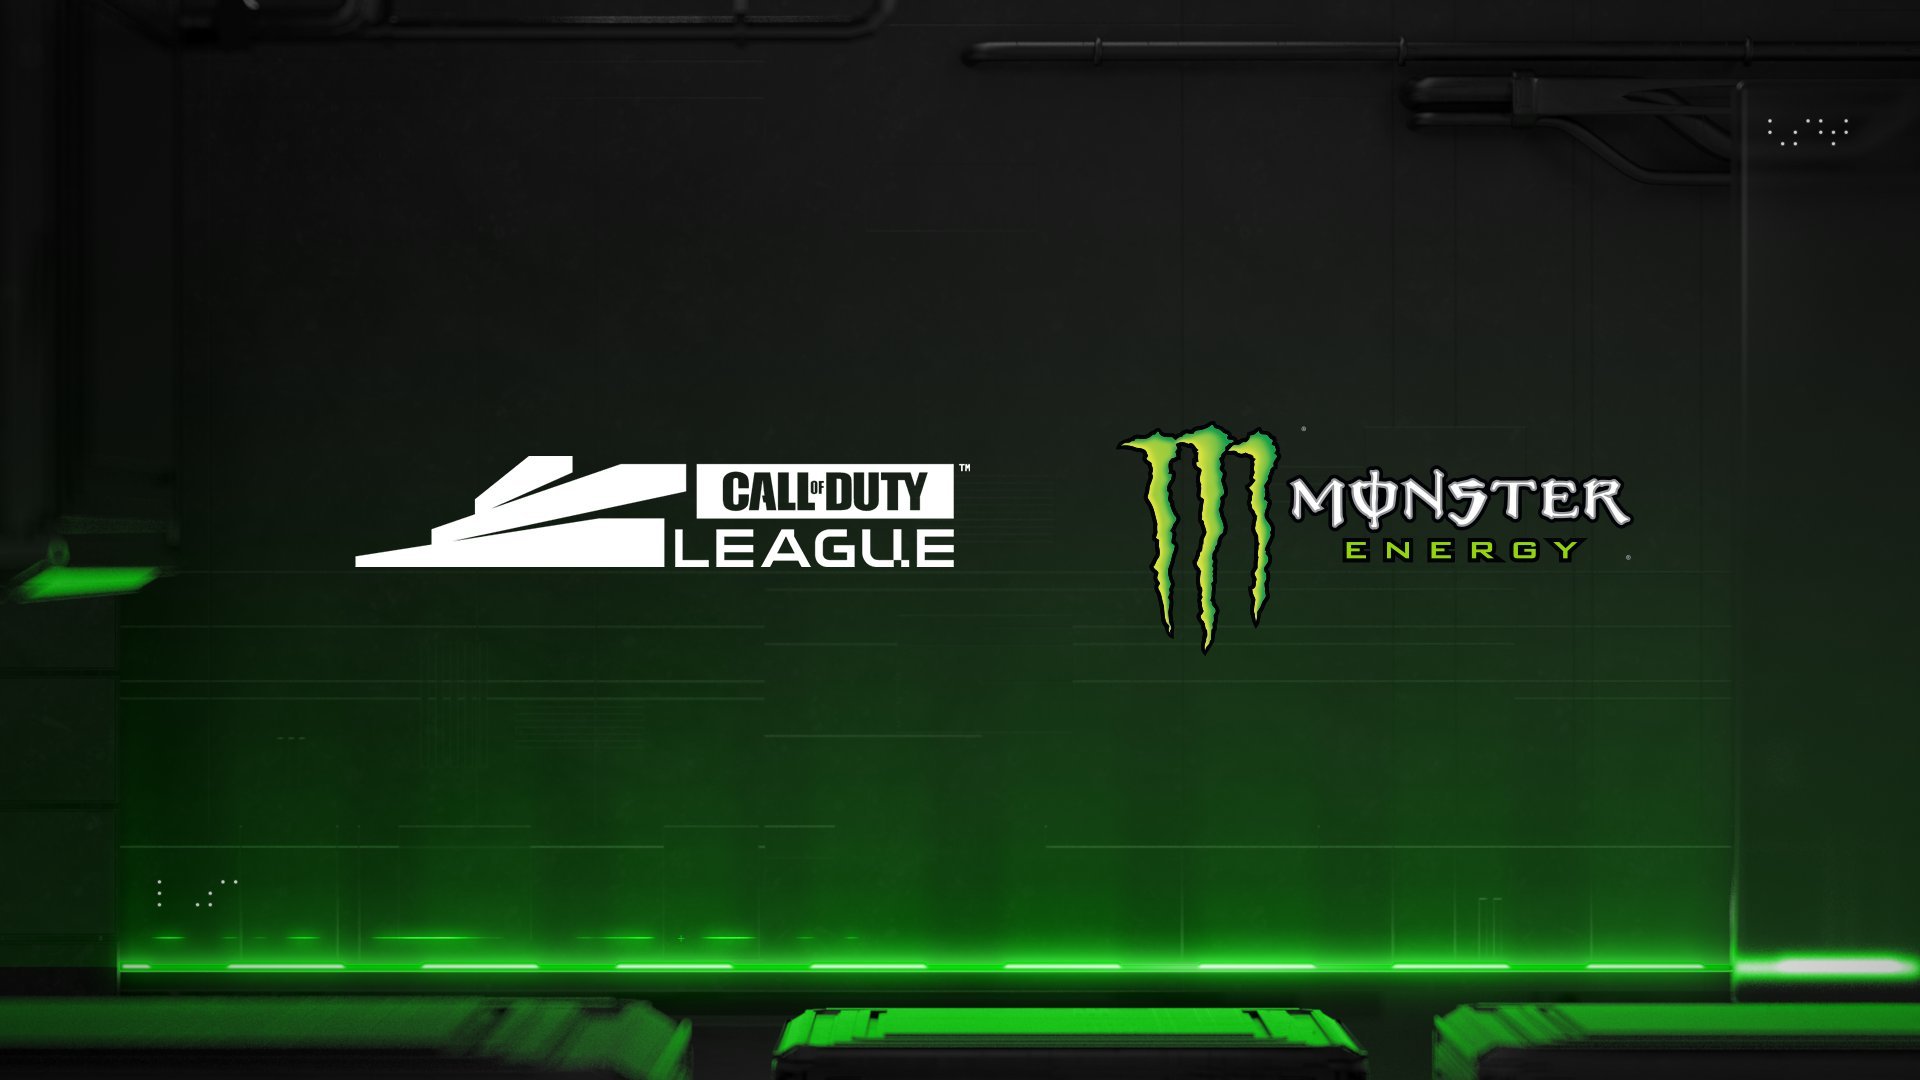 Monster Energy becomes the latest partner of the Call of Duty League